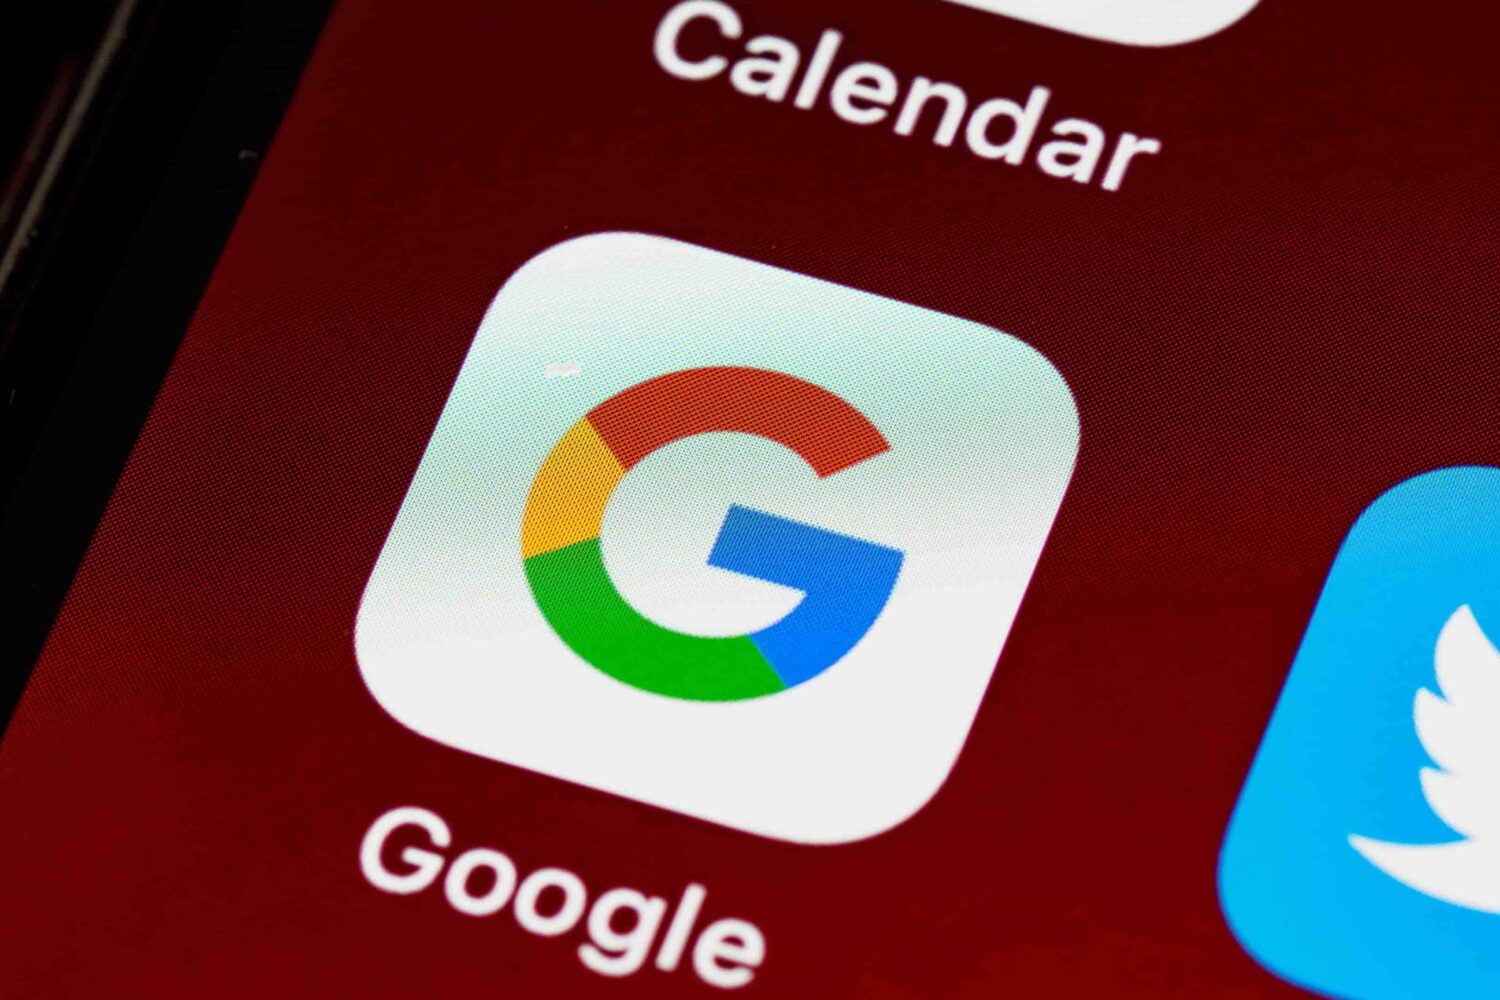 This image from Unsplash shows a closeup of the Google app icon on an iPhone home screen